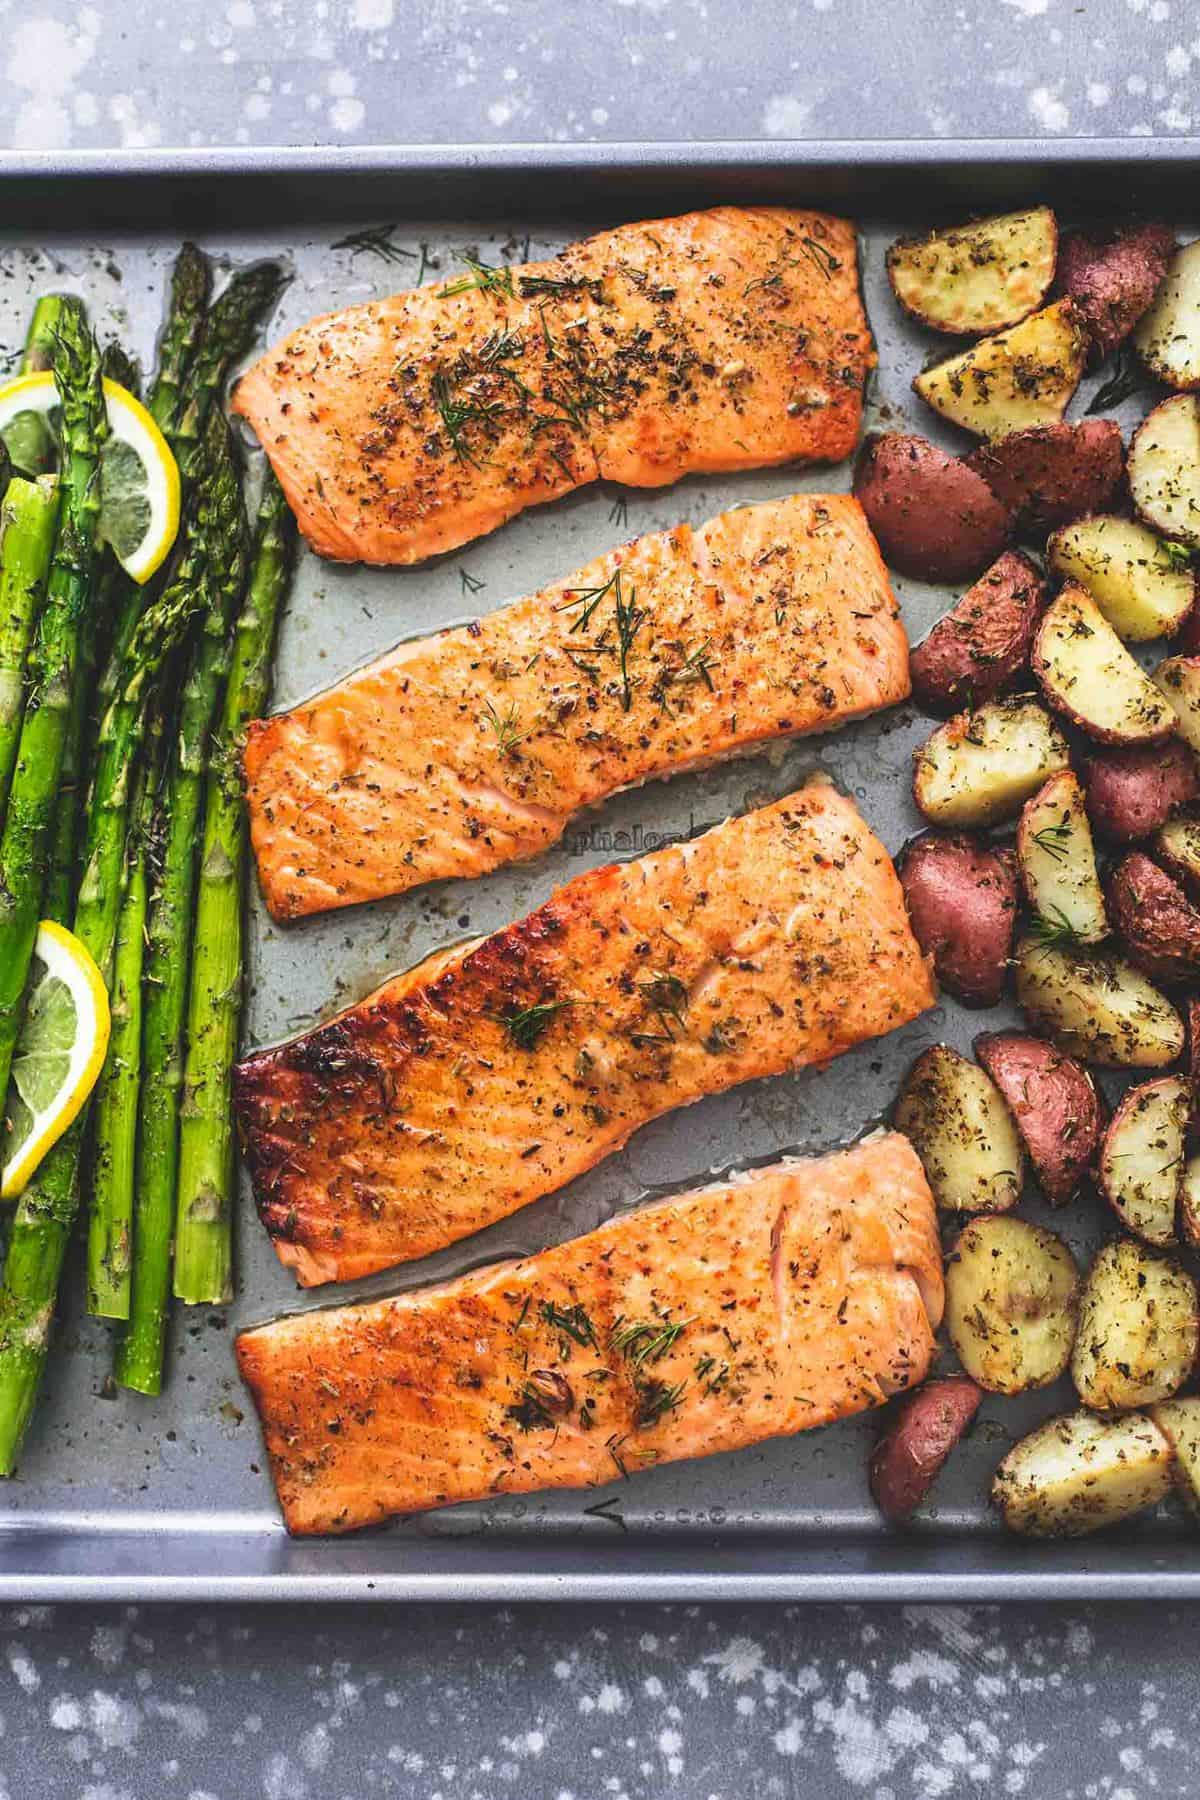 top view of sheet pan baked salmon and asparagus with potatoes on a sheet pan.